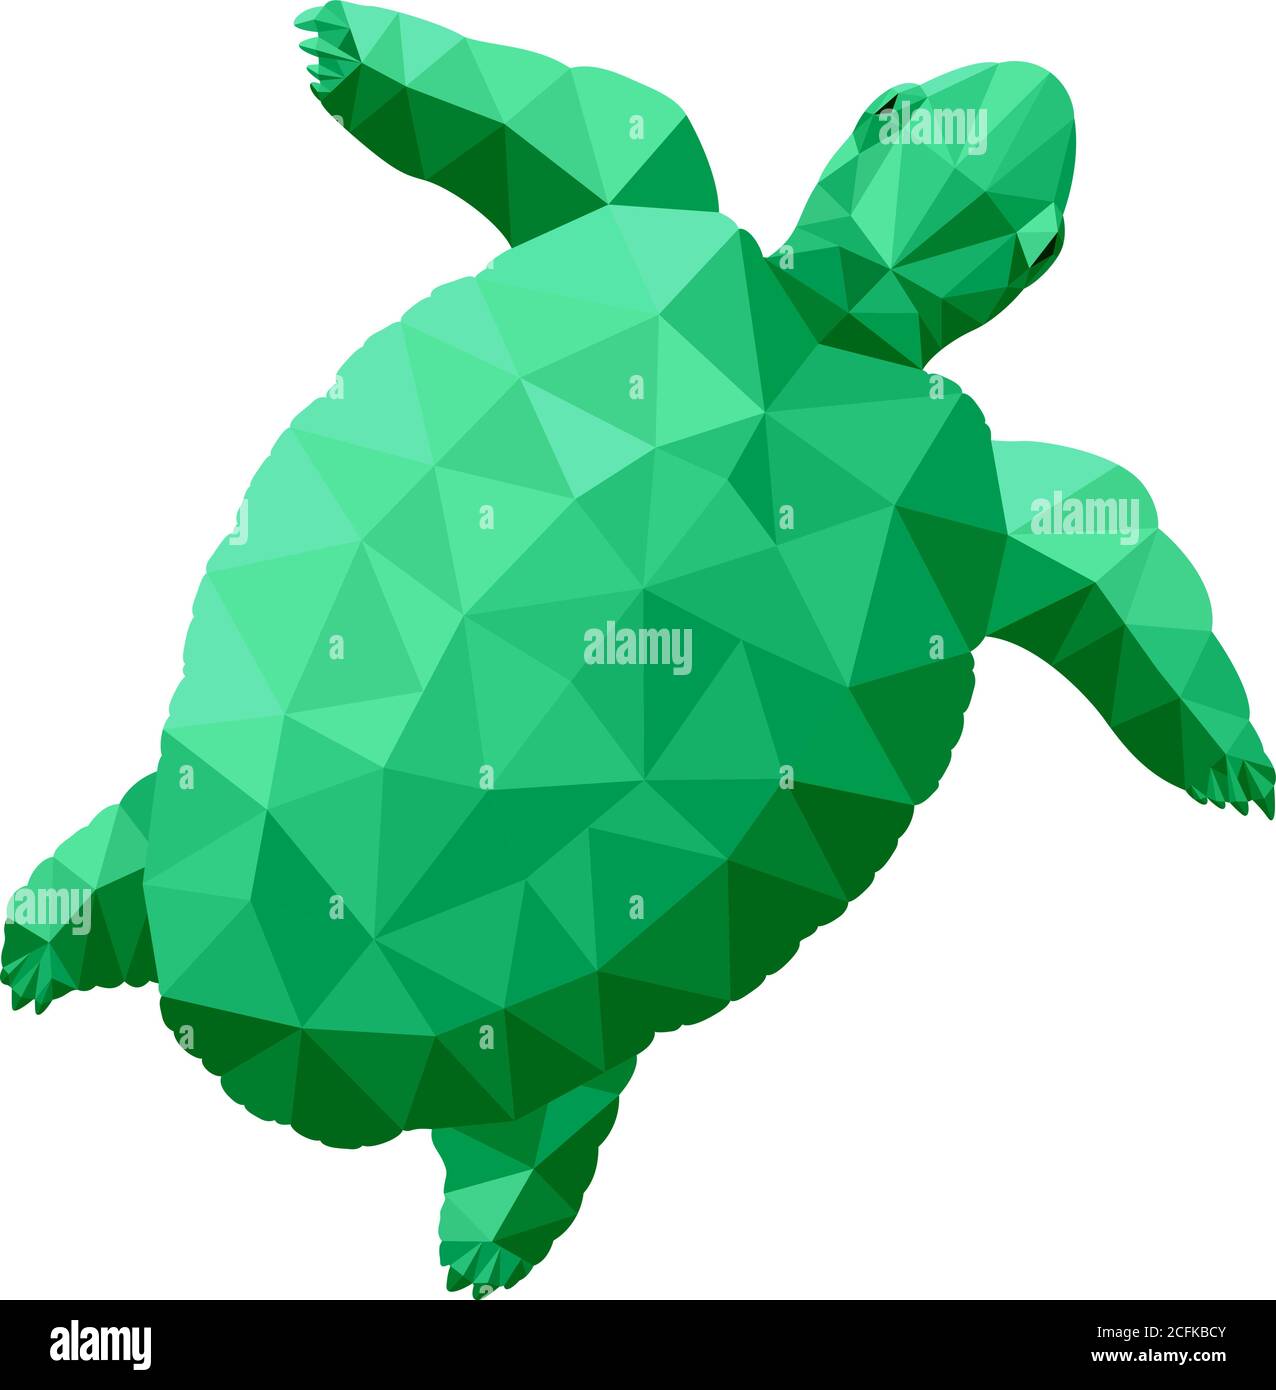 Beautiful low poly illustration with green stylized turtle on white background Stock Vector